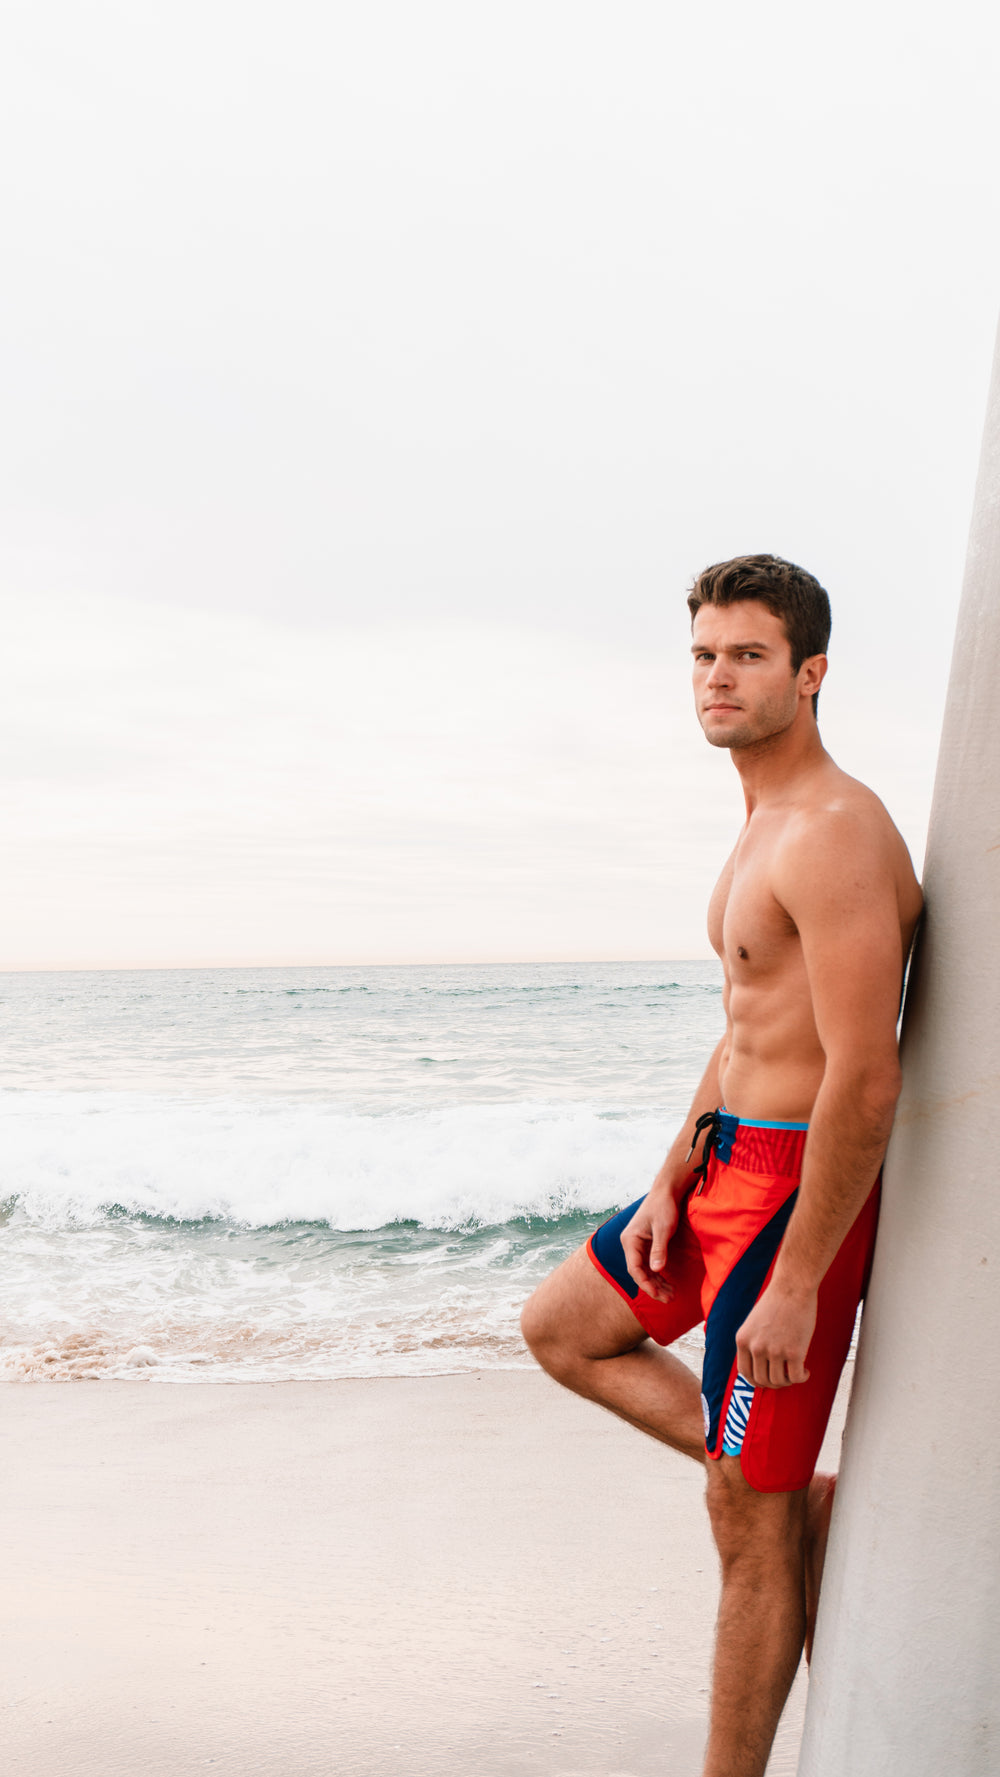 Team USA Boardshorts in Red